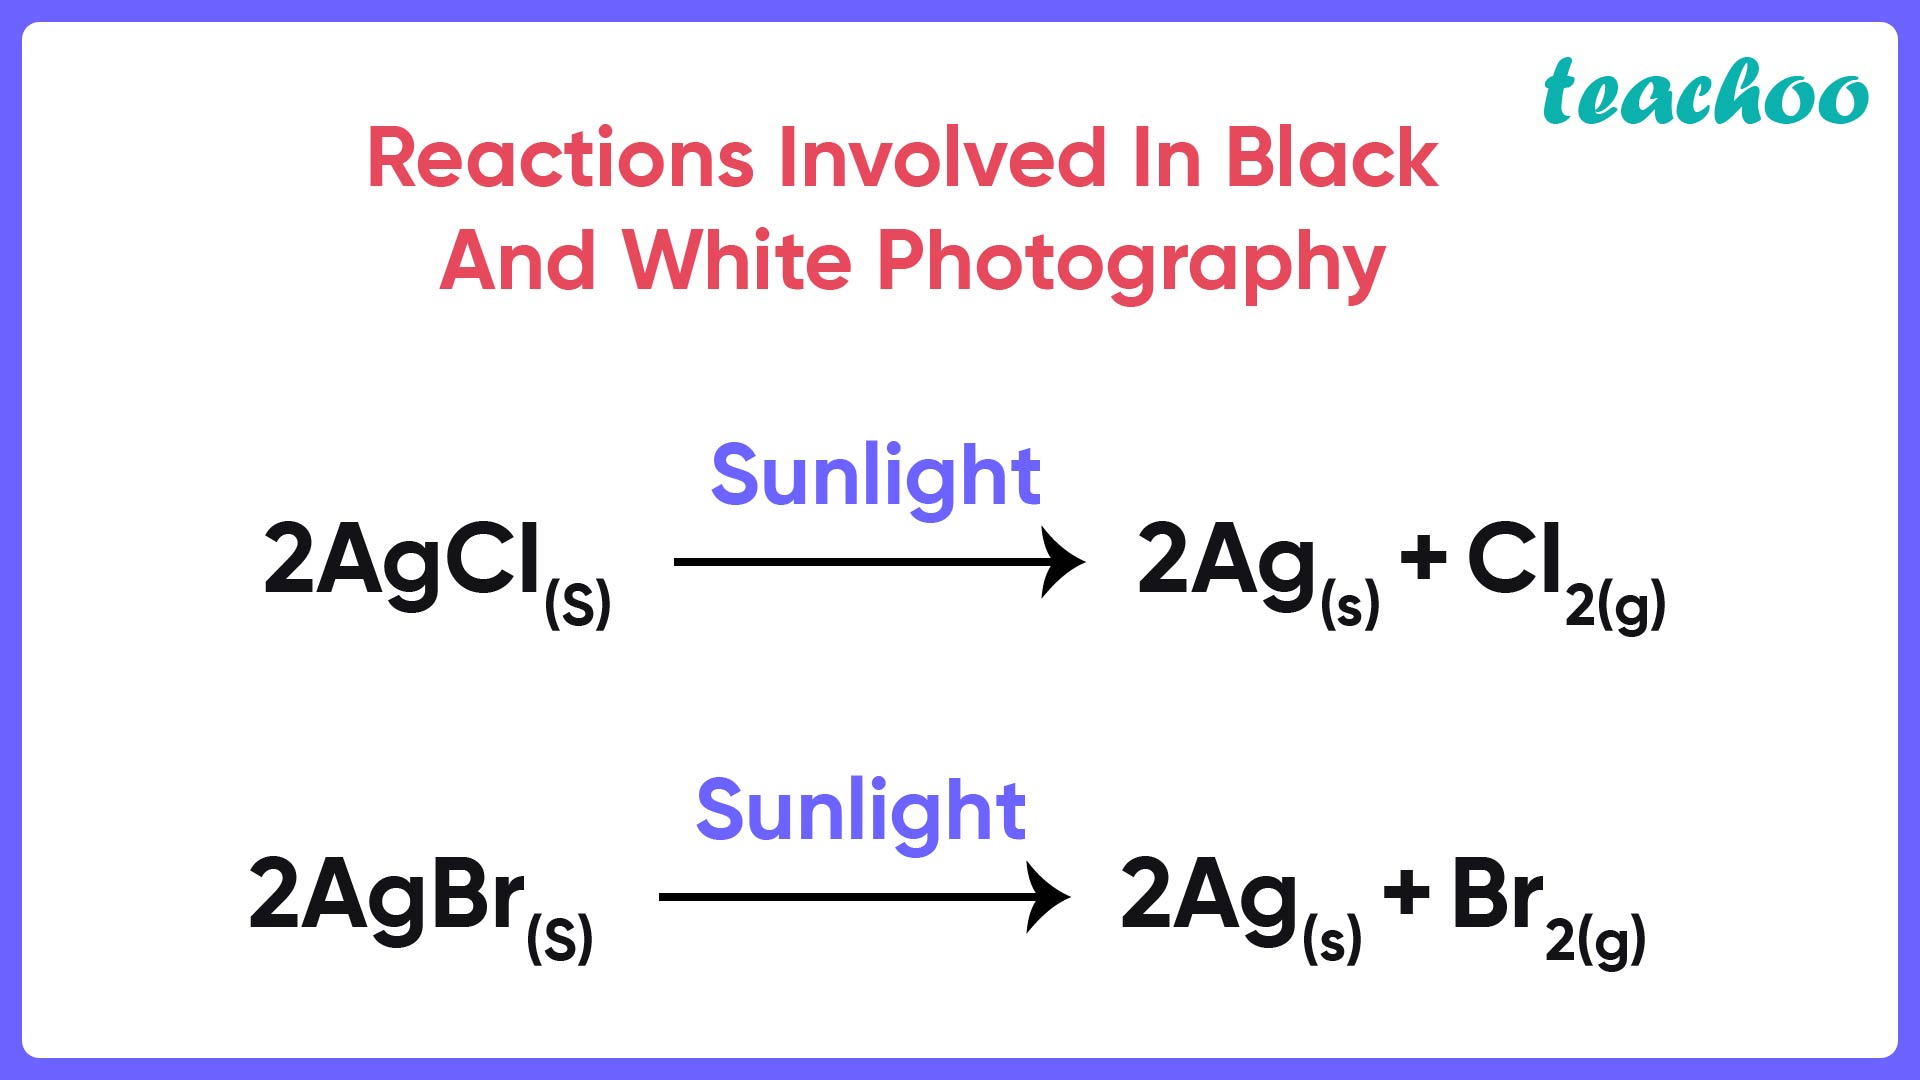 Reactions Involved In Black And White Photography - Teachoo-01.jpg